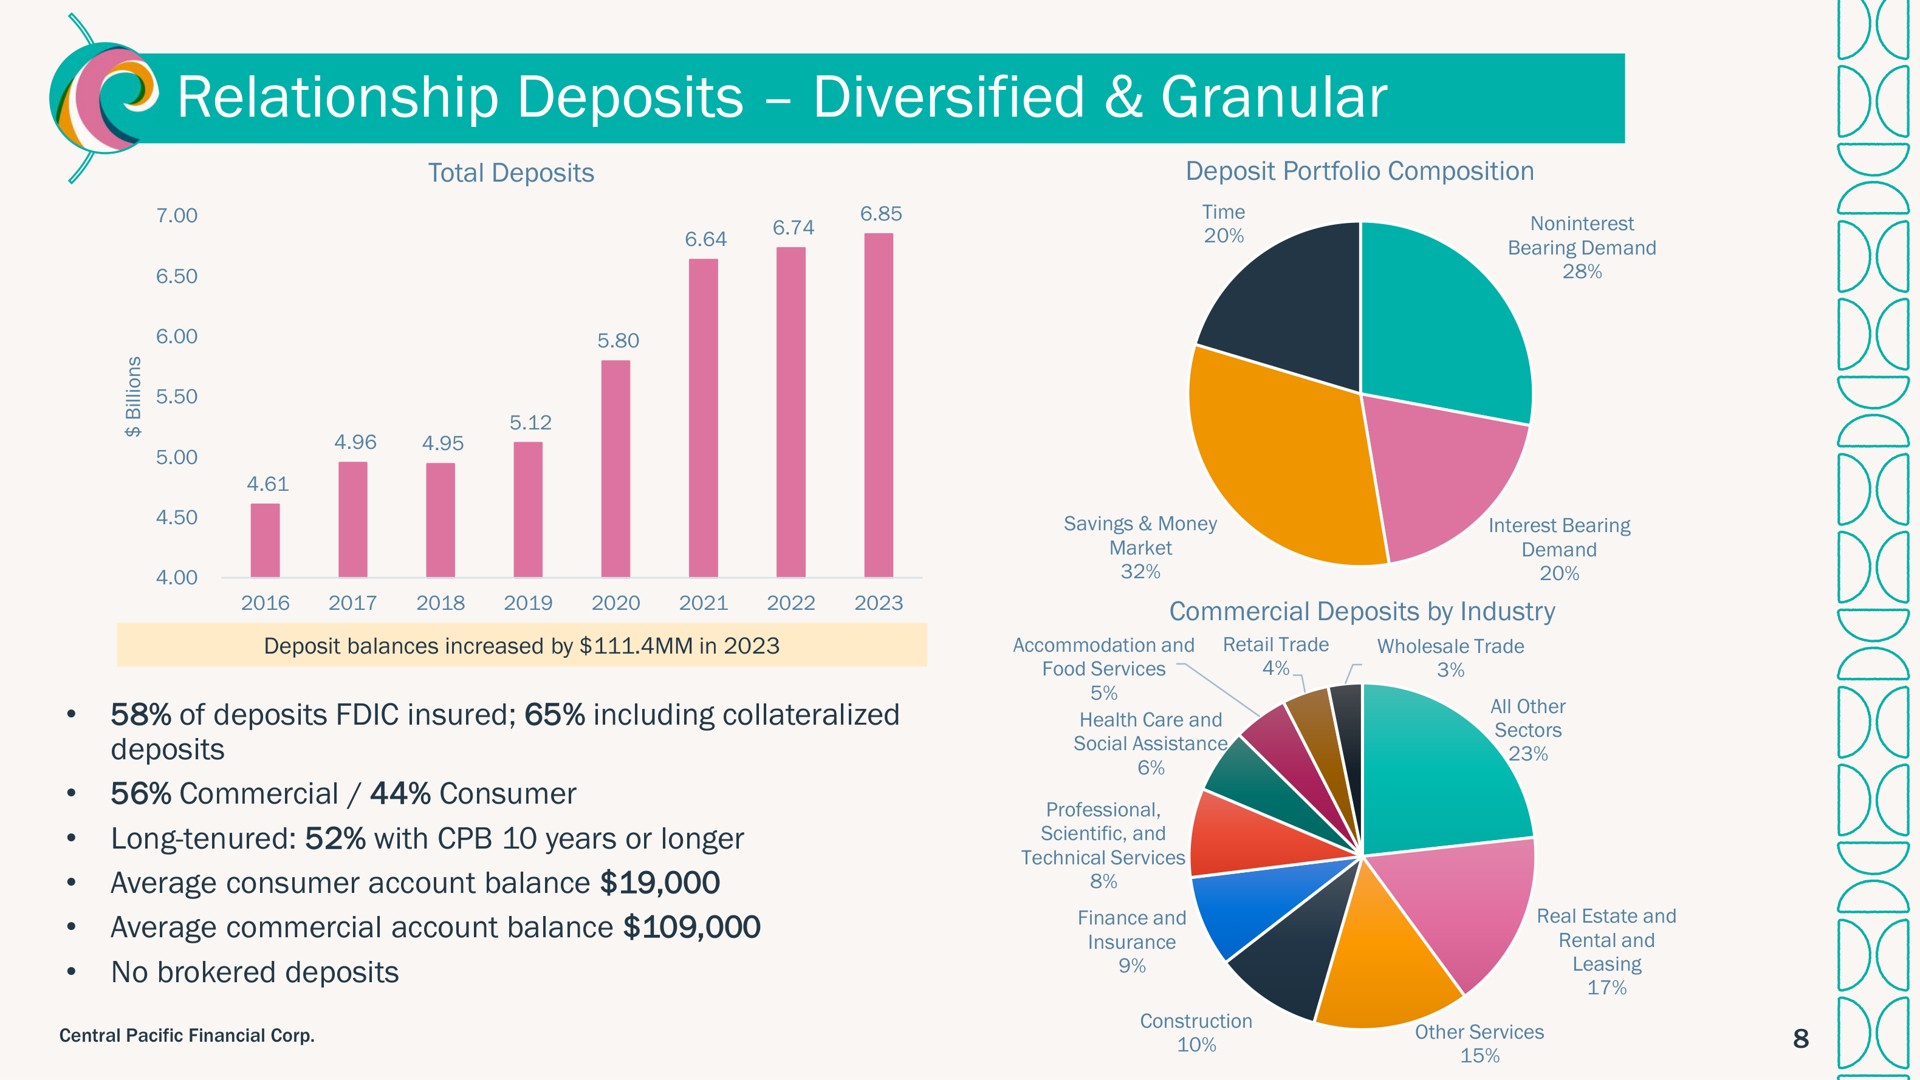 relationship deposits diversified granular i i | Central Pacific Financial